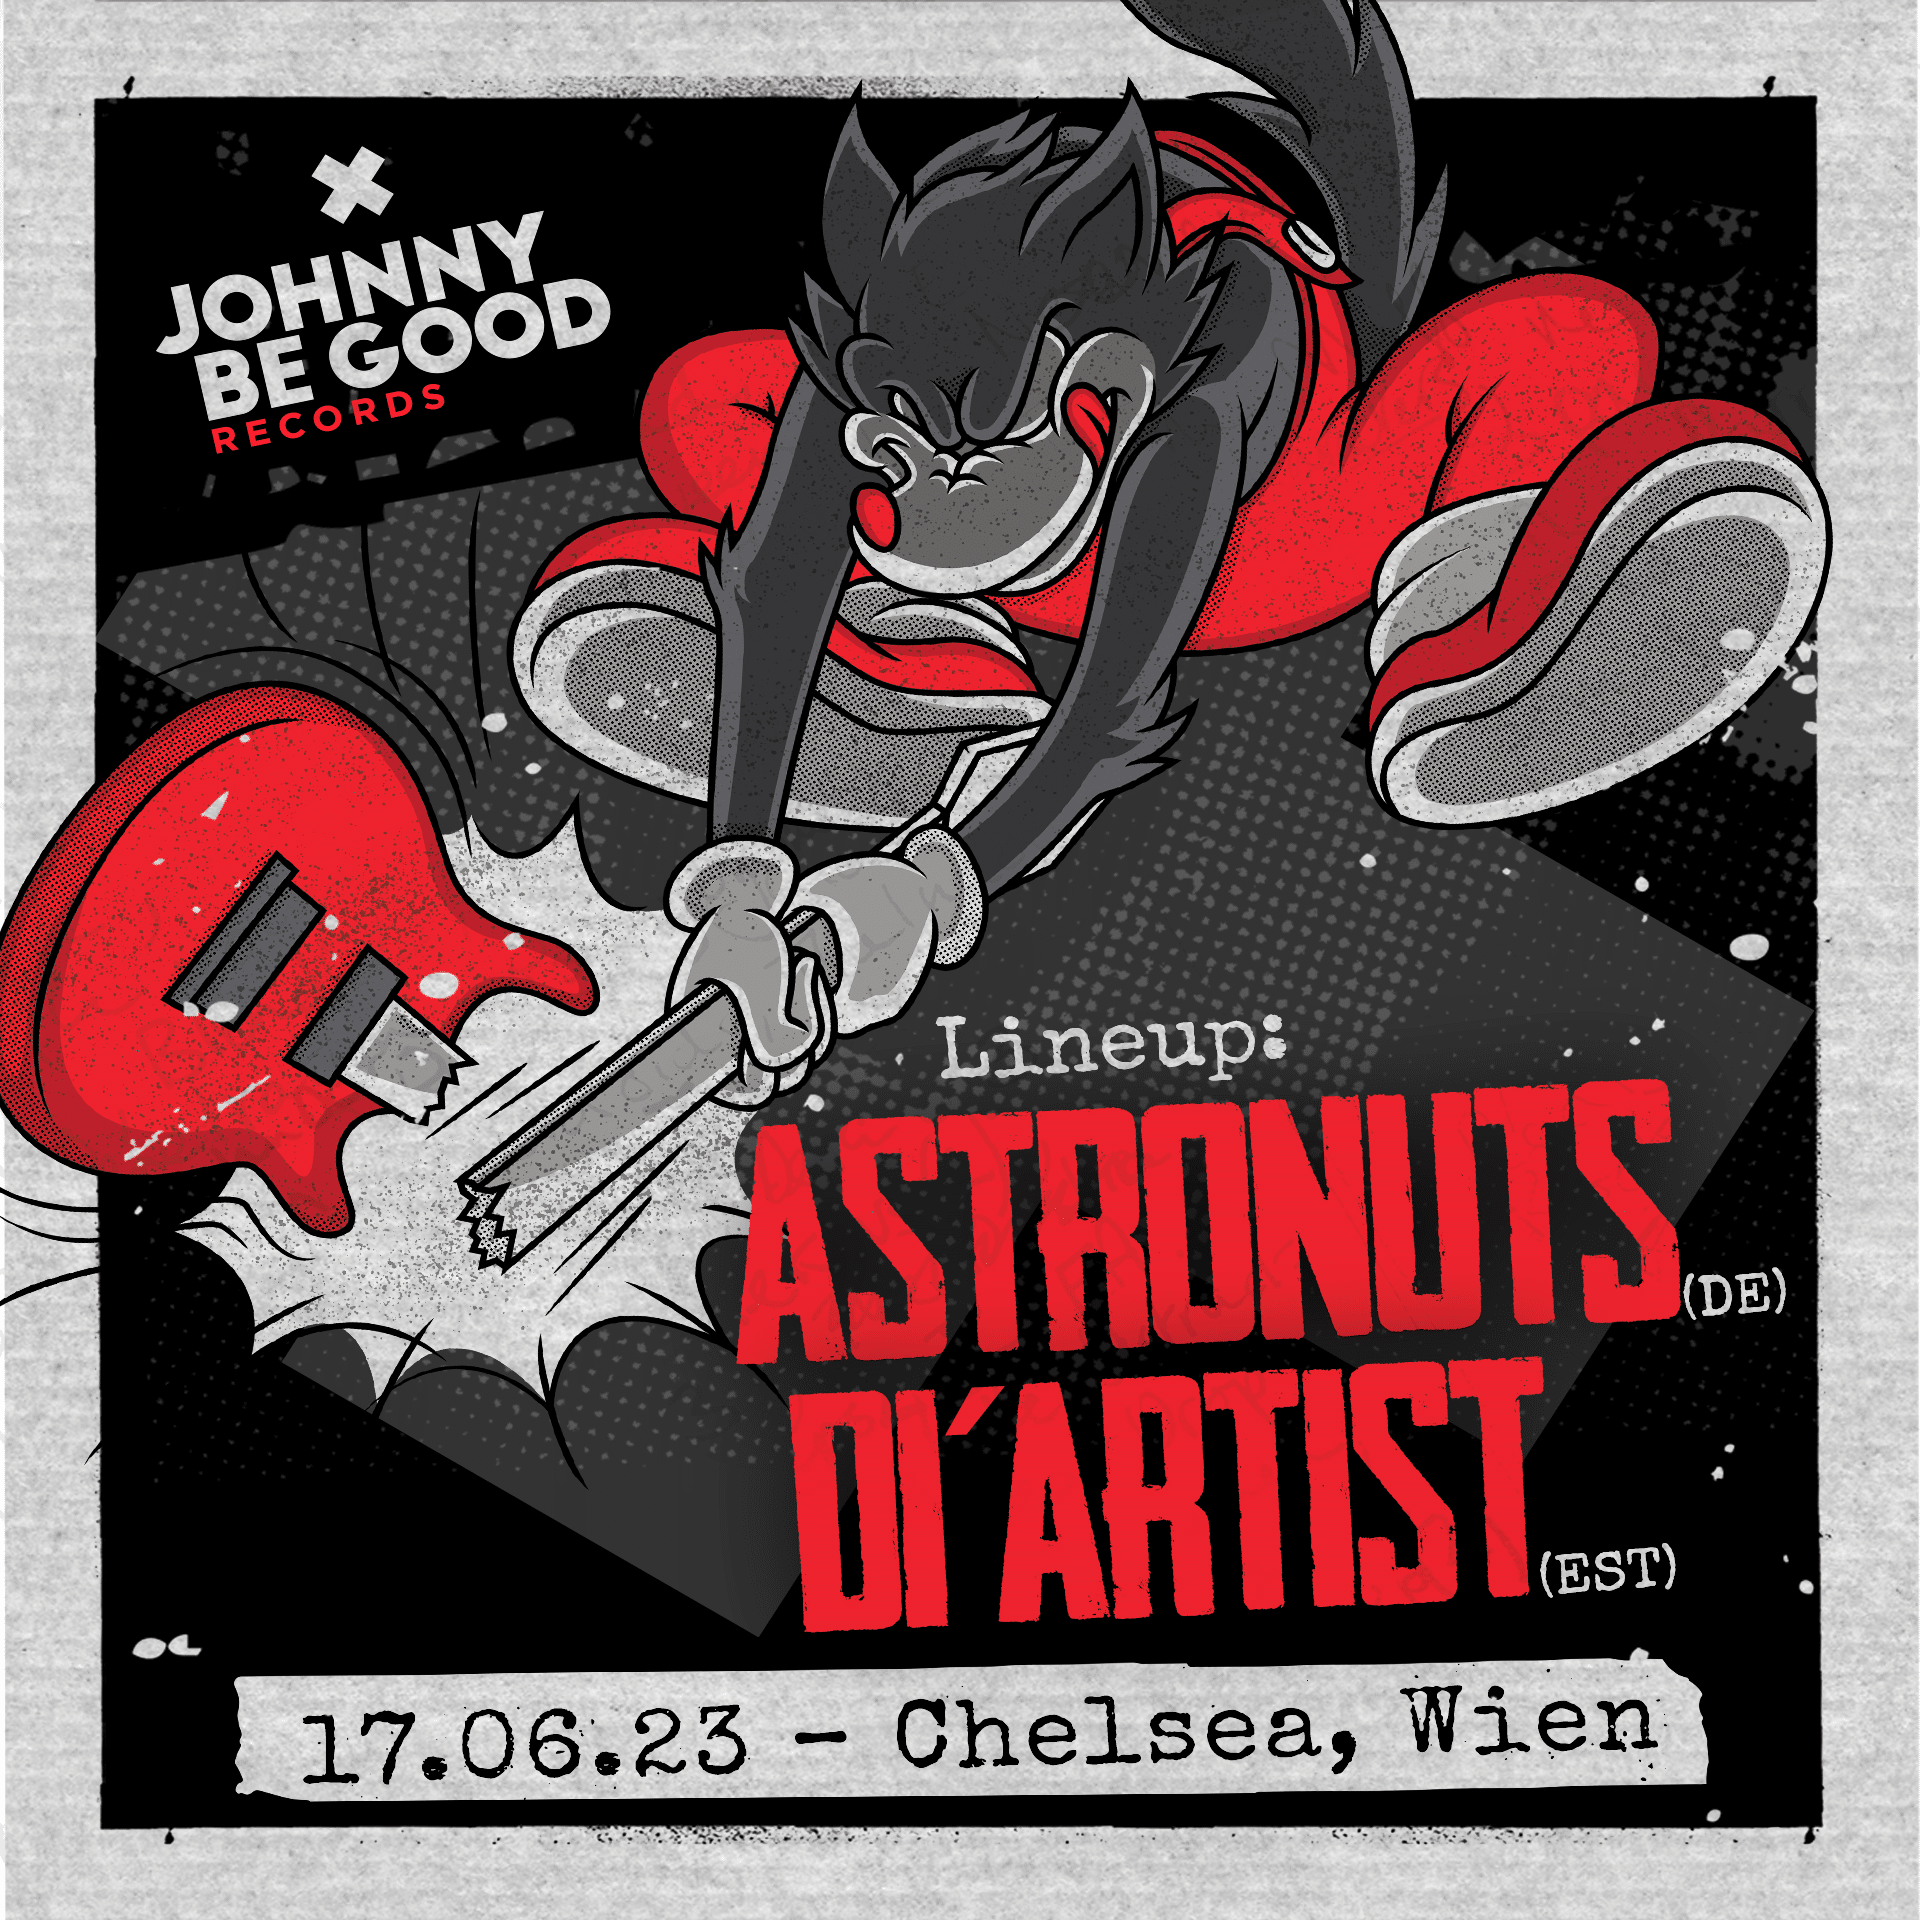 Johnny Be Good Records Night | Chelsea Wien | Astronuts | Di’Artist